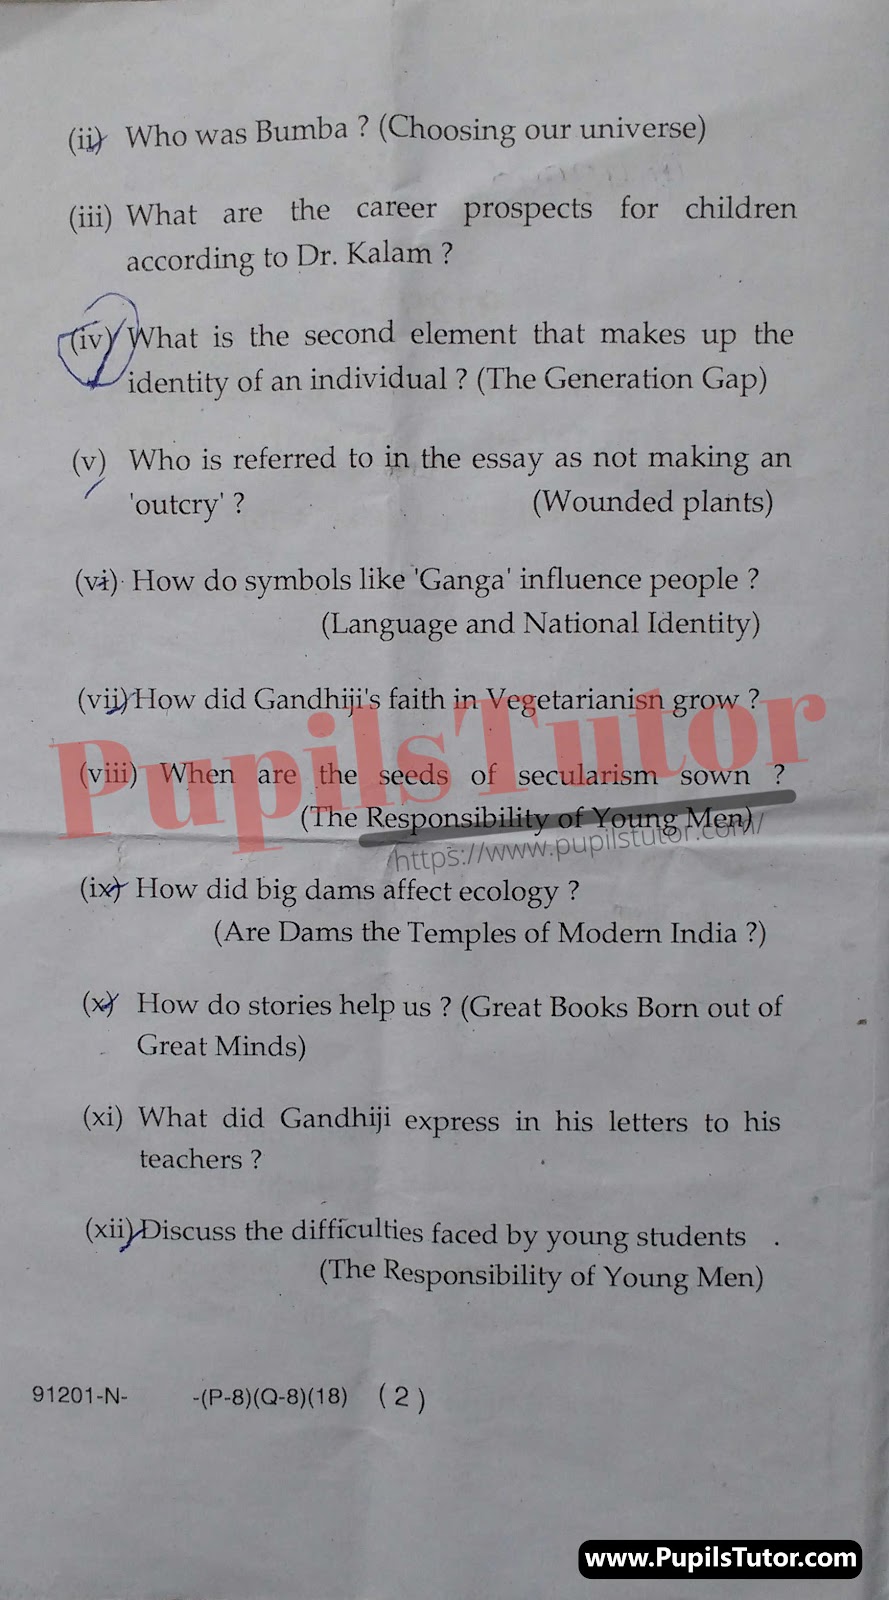 M.D. University B.A. English First Semester Important Question Answer And Solution - www.pupilstutor.com (Paper Page Number 2)